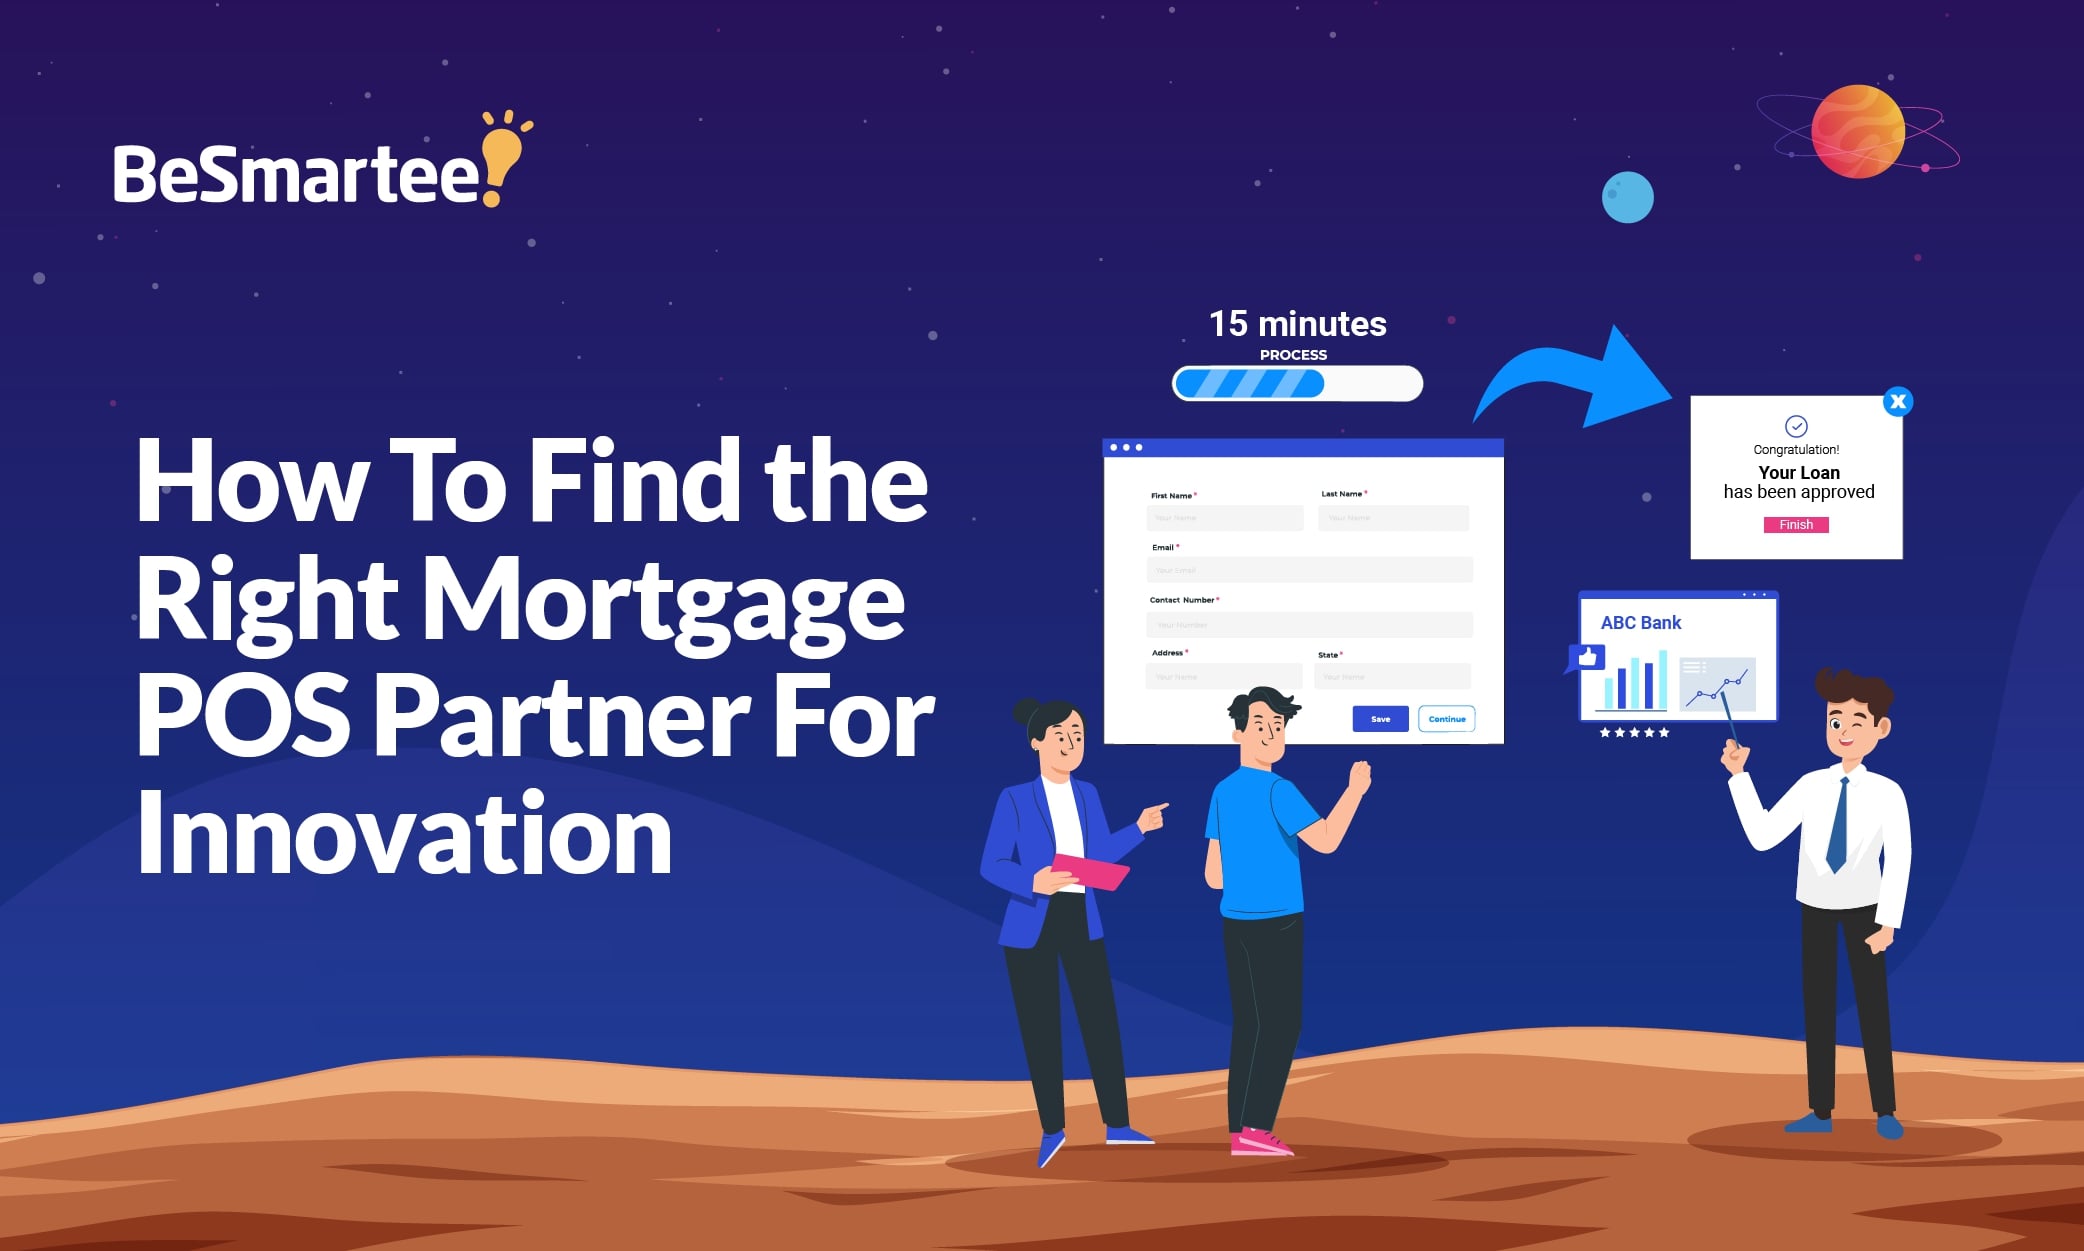 How To Find the Right Mortgage POS Partner For Innovation